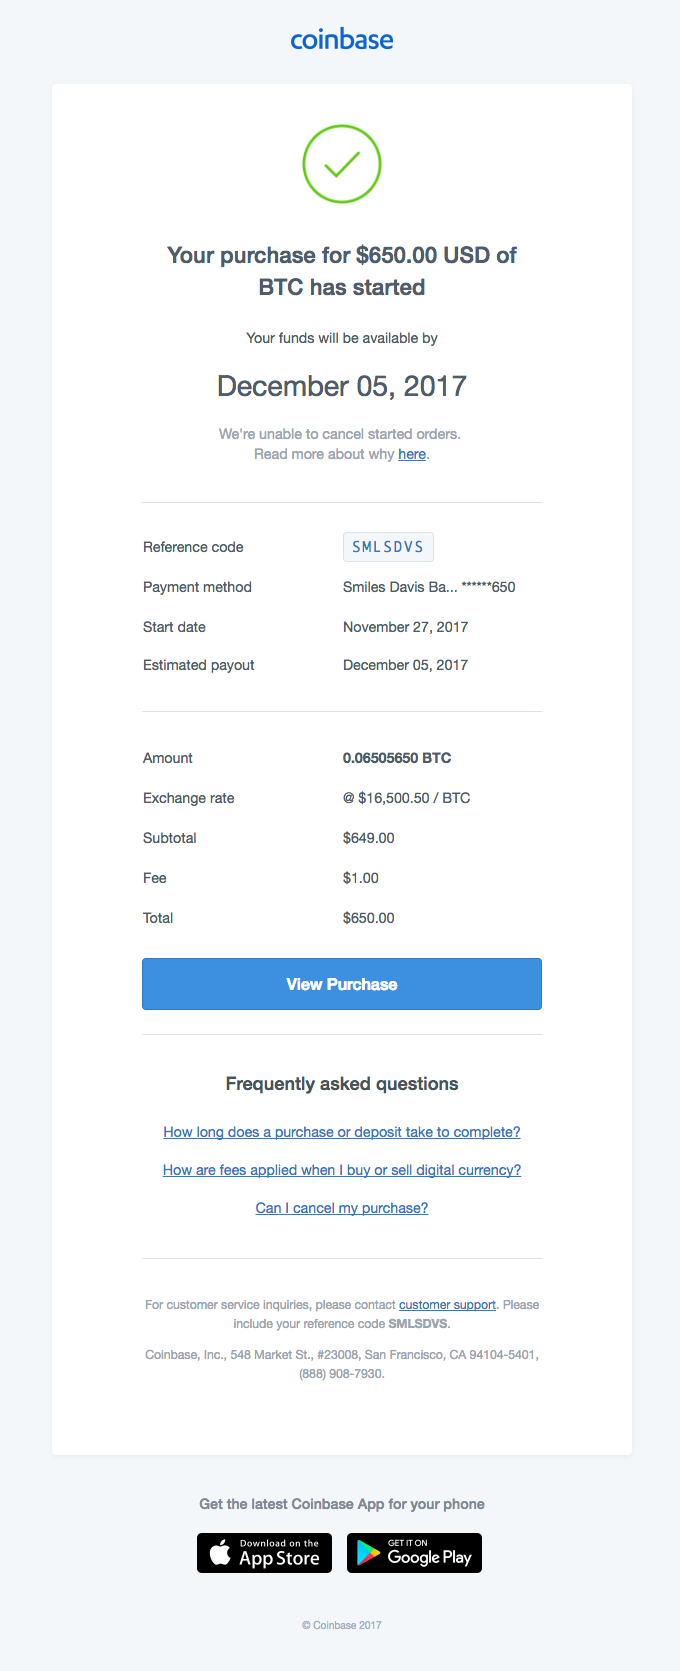 Your purchase for $650.00 USD of BTC has started